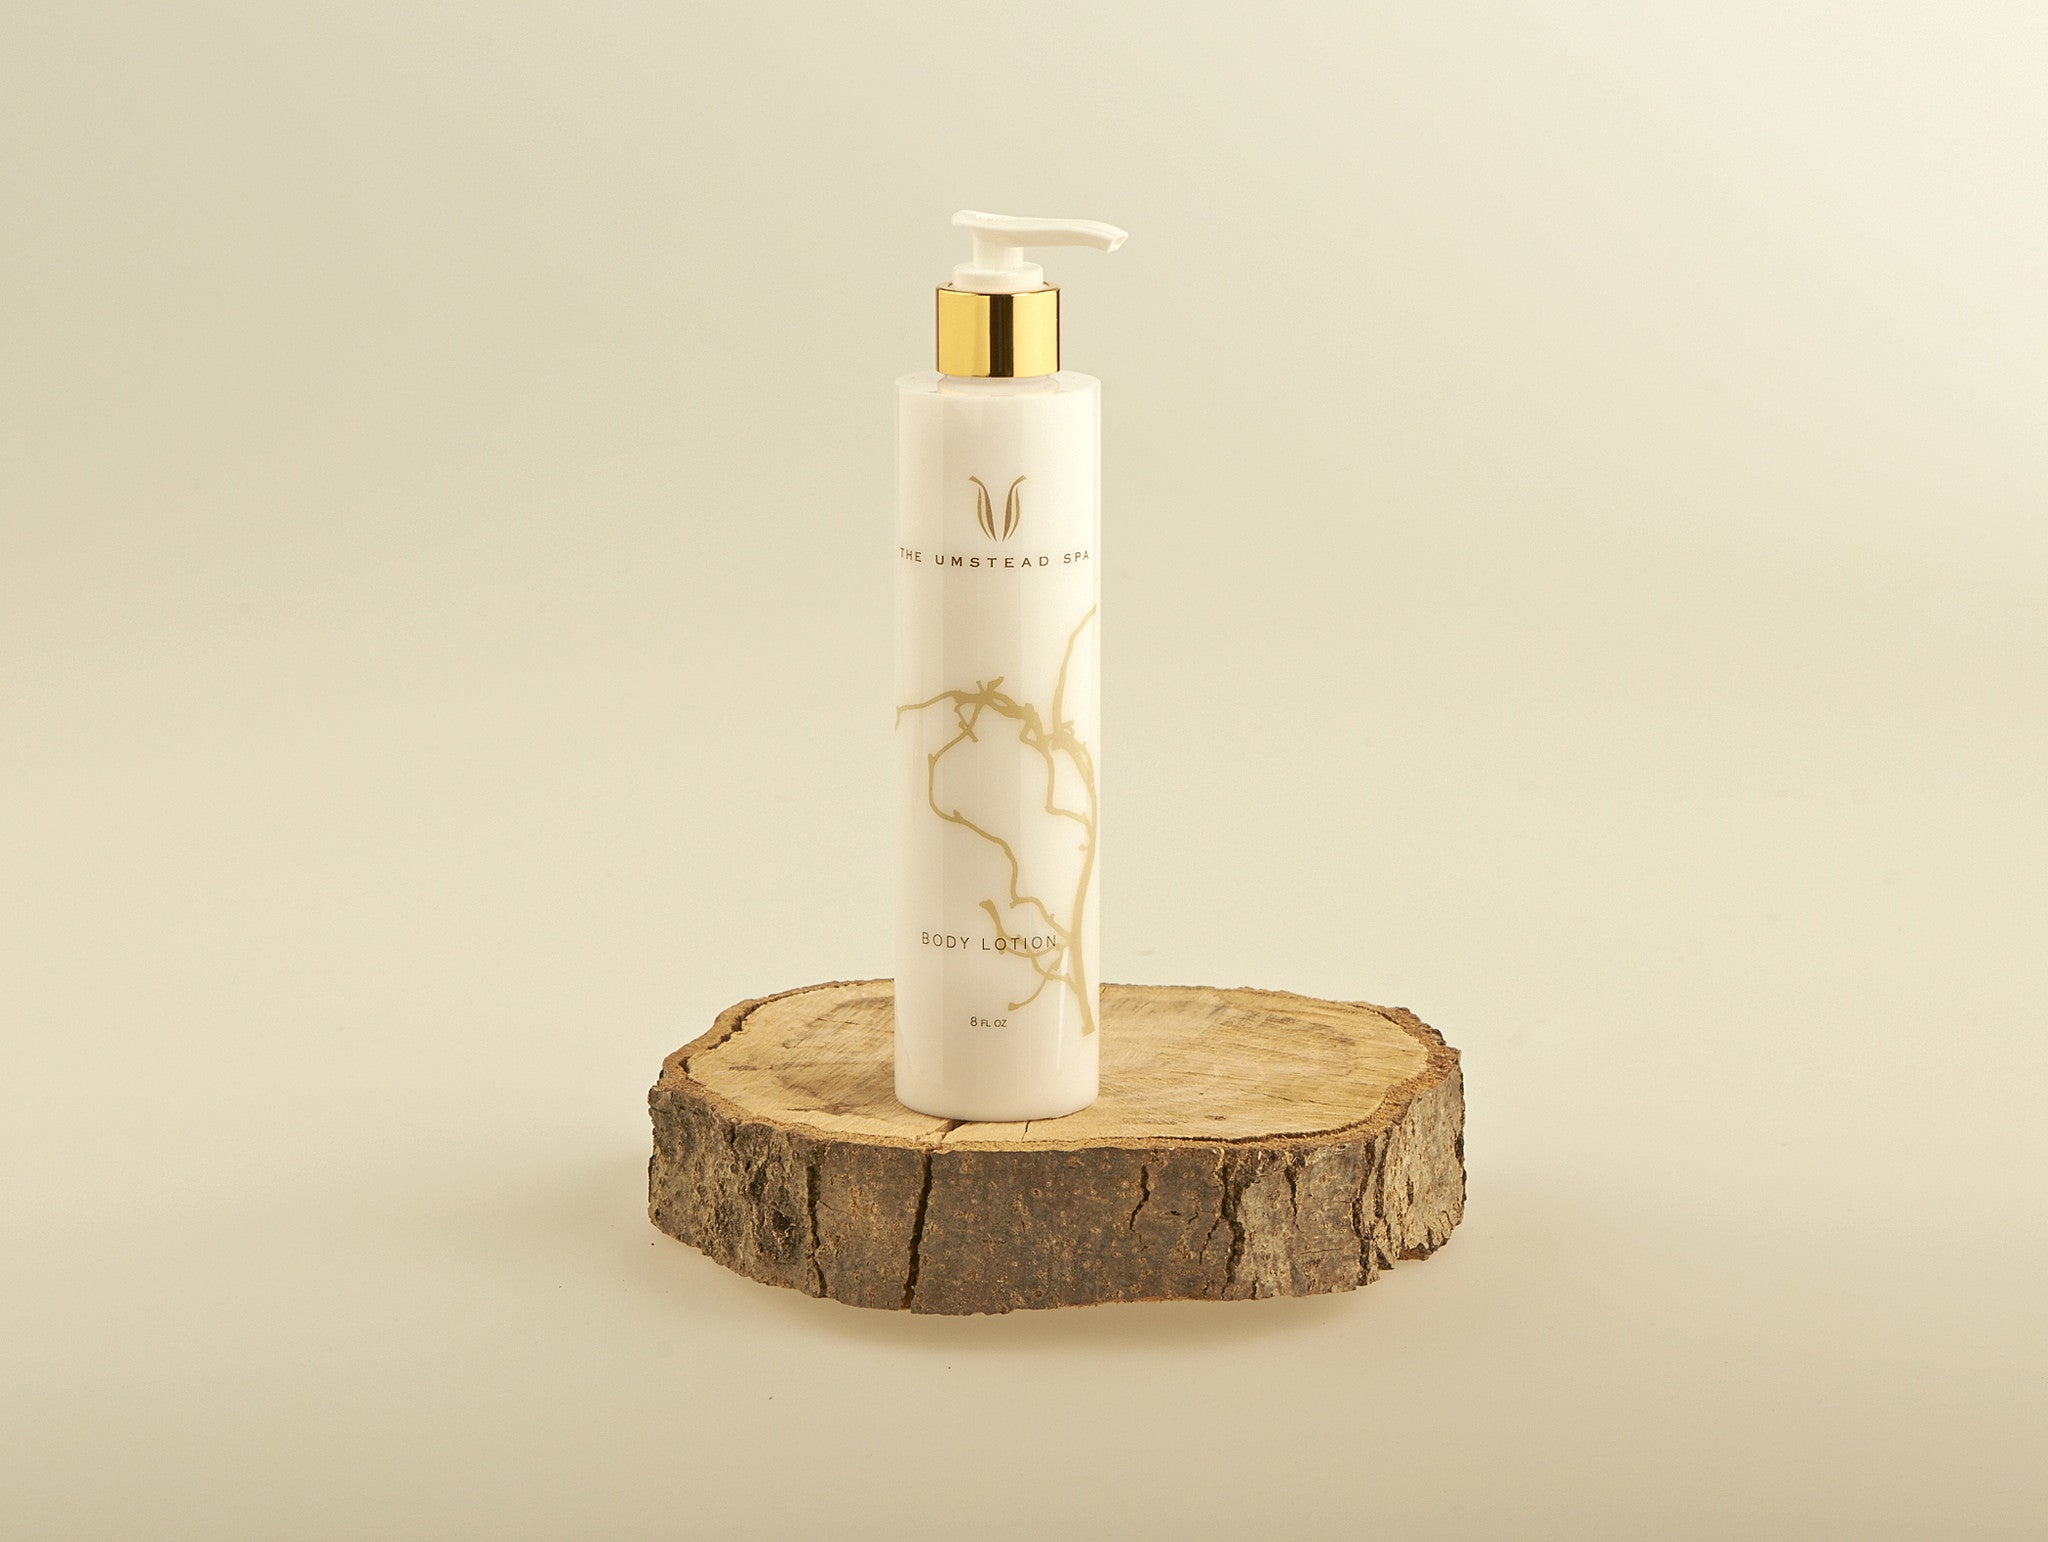 Umstead Signature Body Lotion